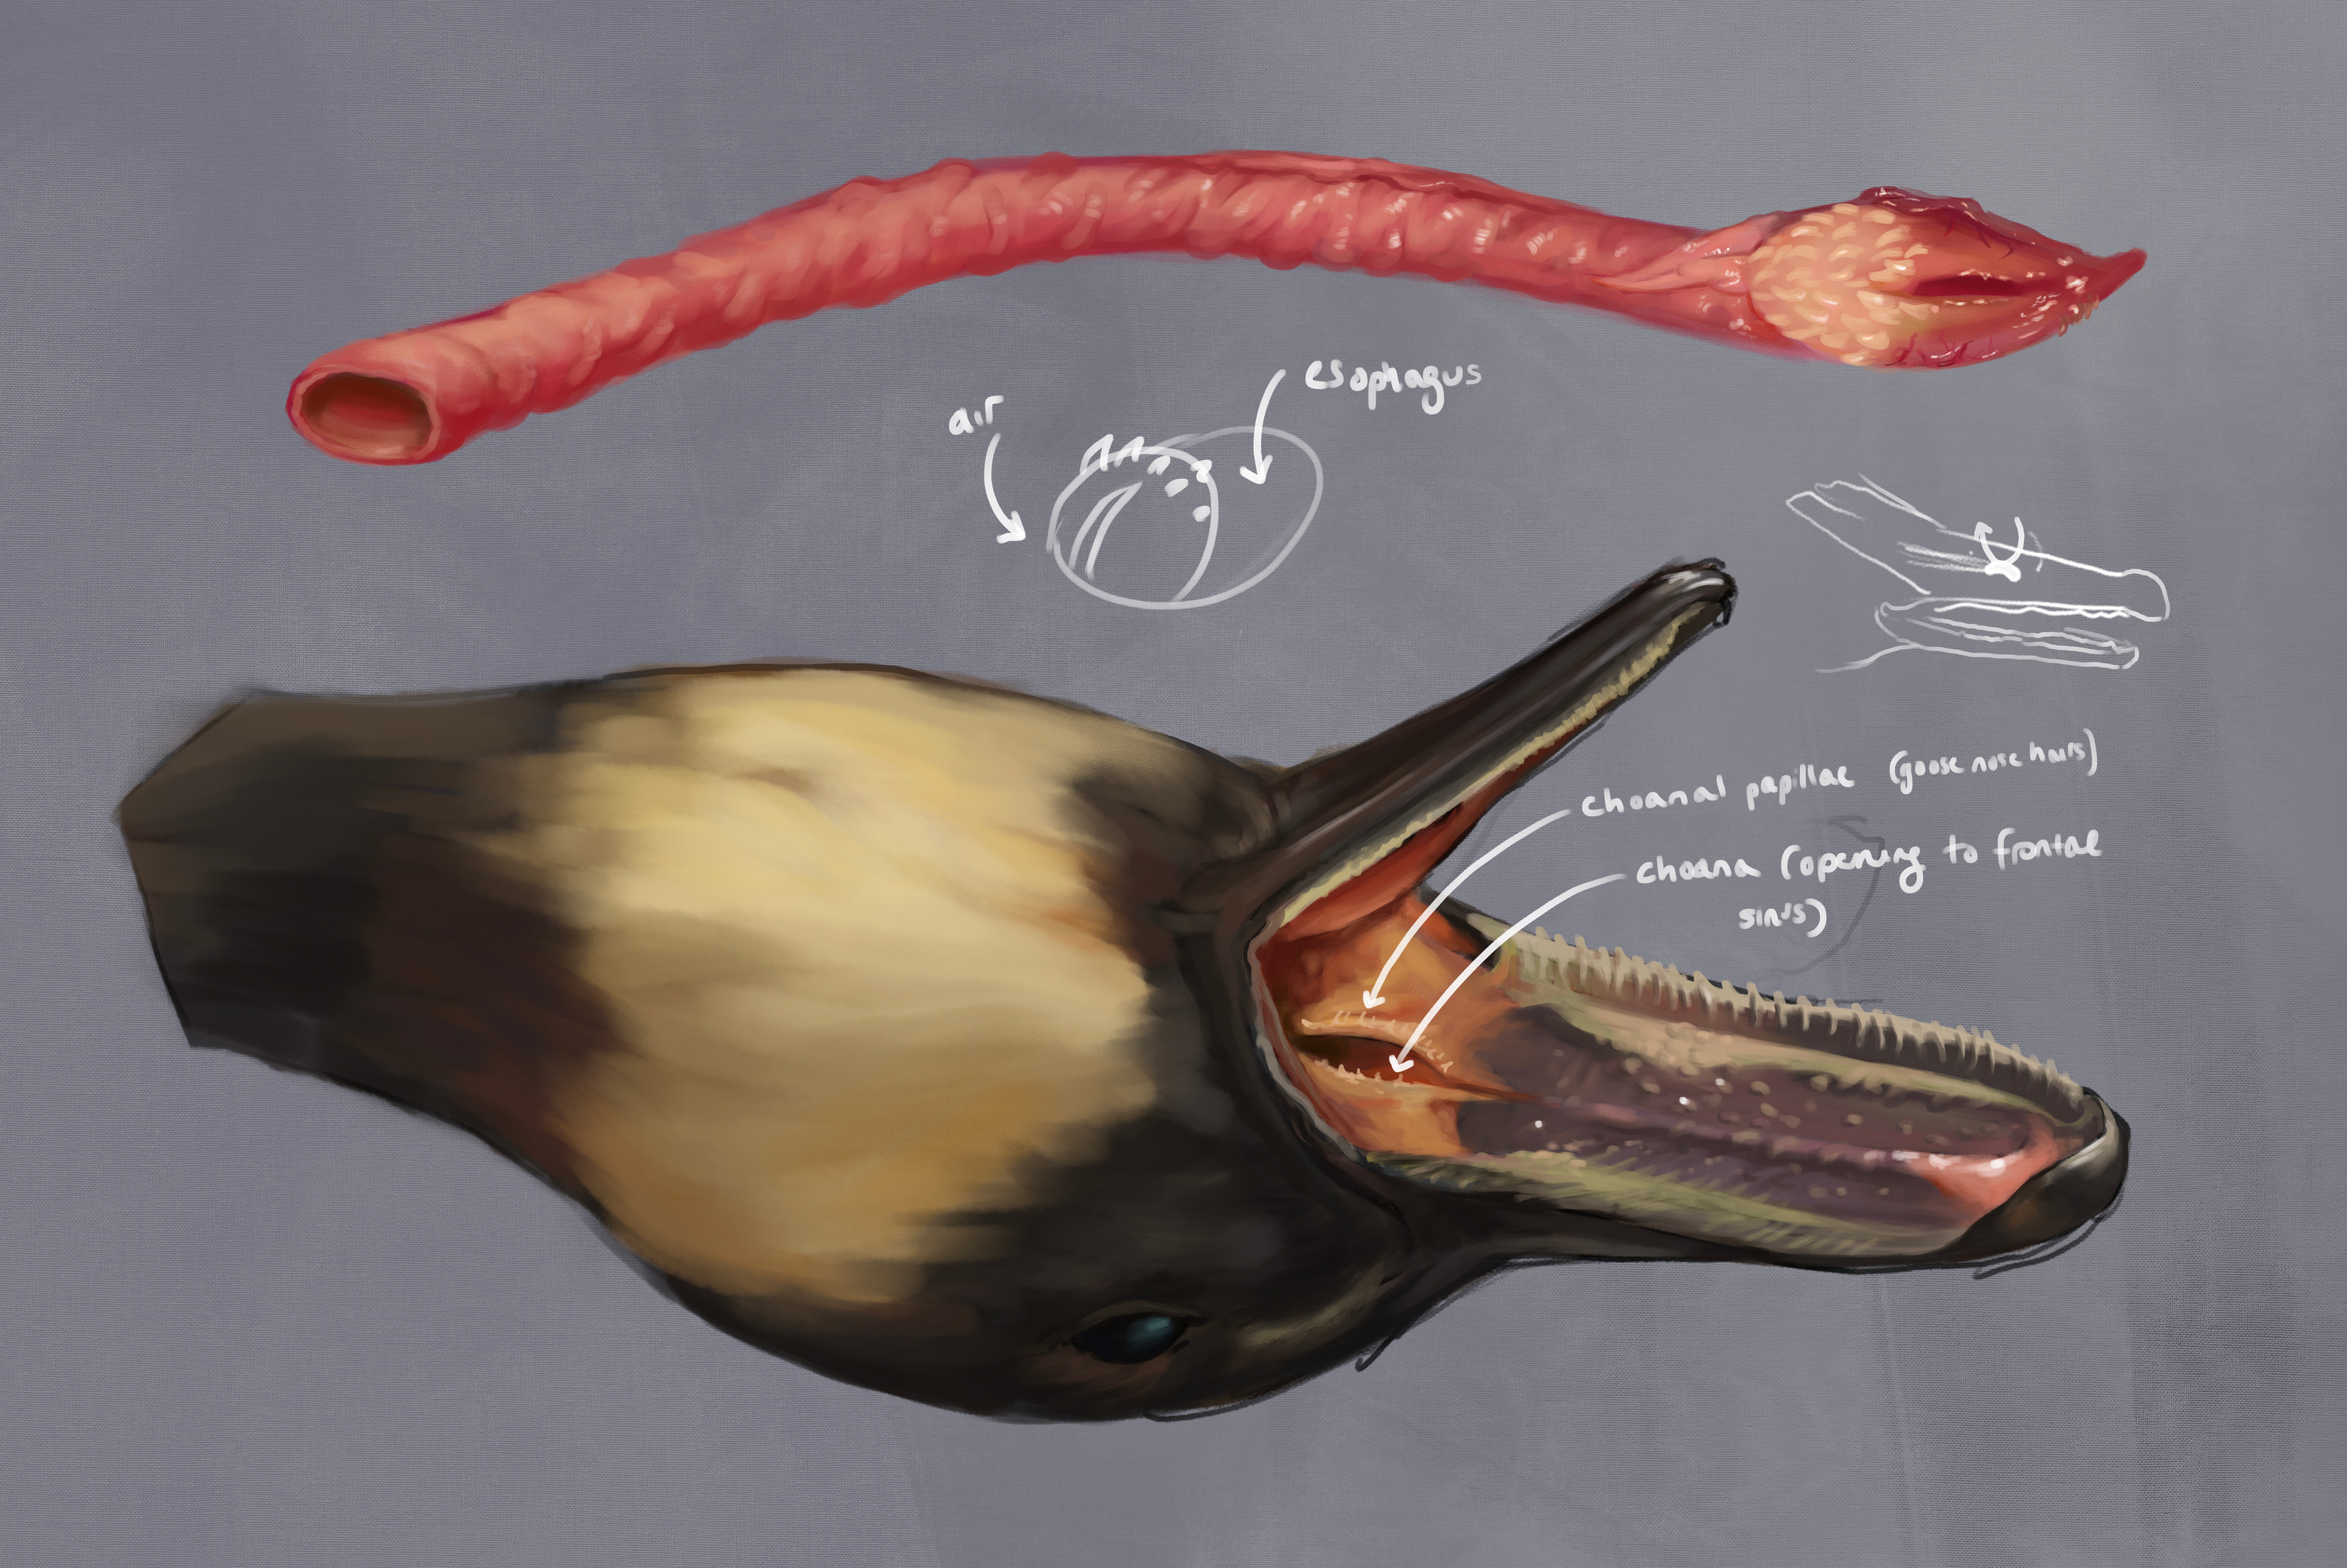 Some other studies - I pulled out the trachea to study that, and wanted to note the choana on the goose (opening to nasal sinuses)